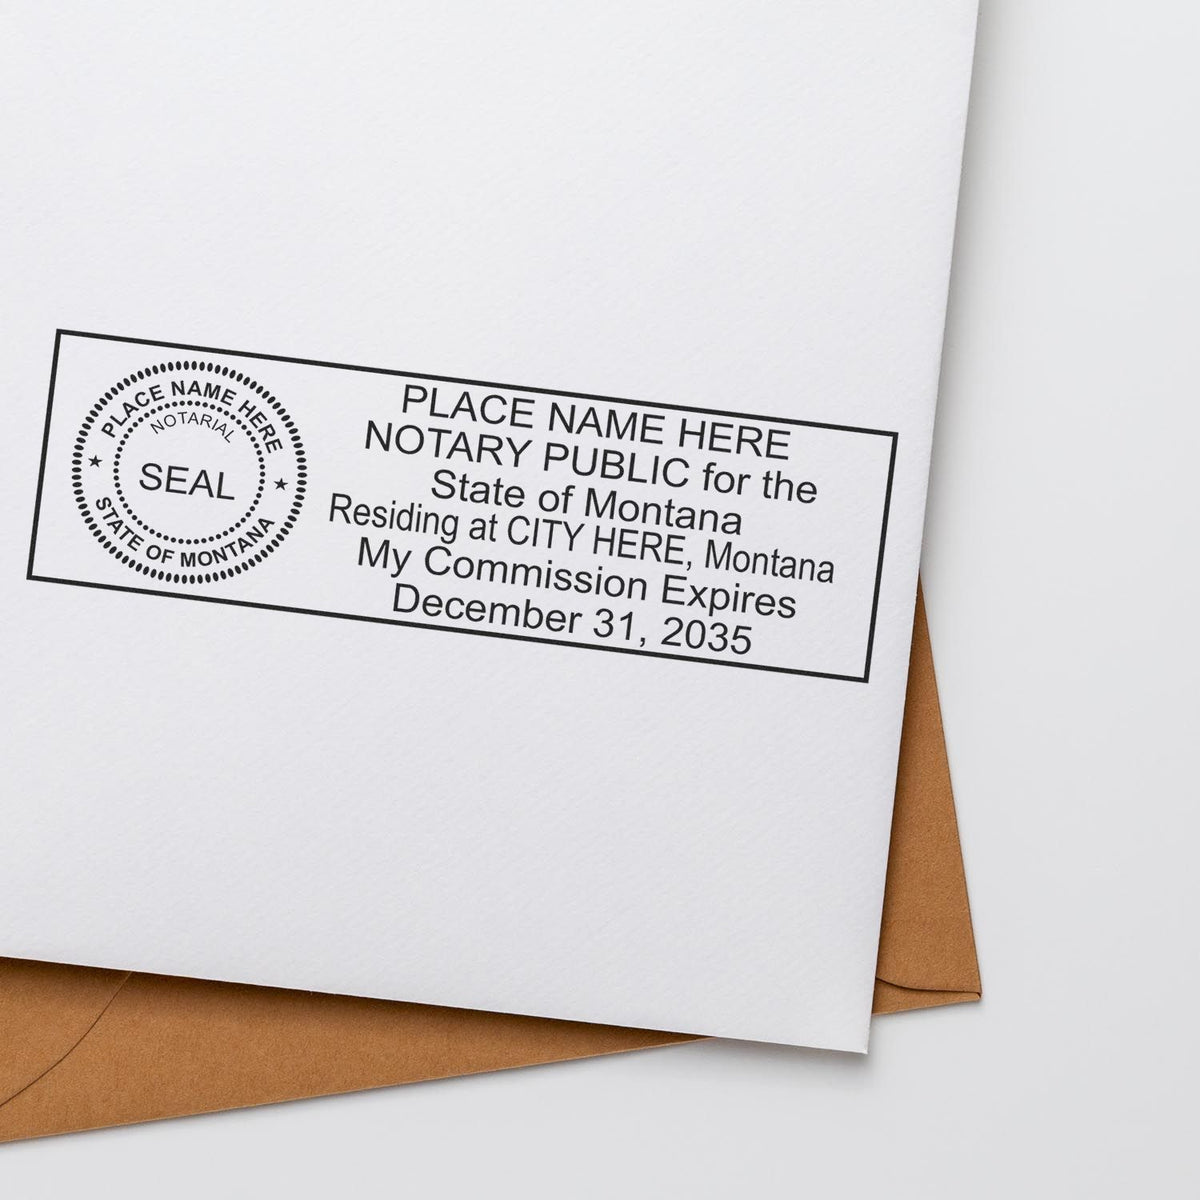 The Super Slim Montana Notary Public Stamp stamp impression comes to life with a crisp, detailed photo on paper - showcasing true professional quality.